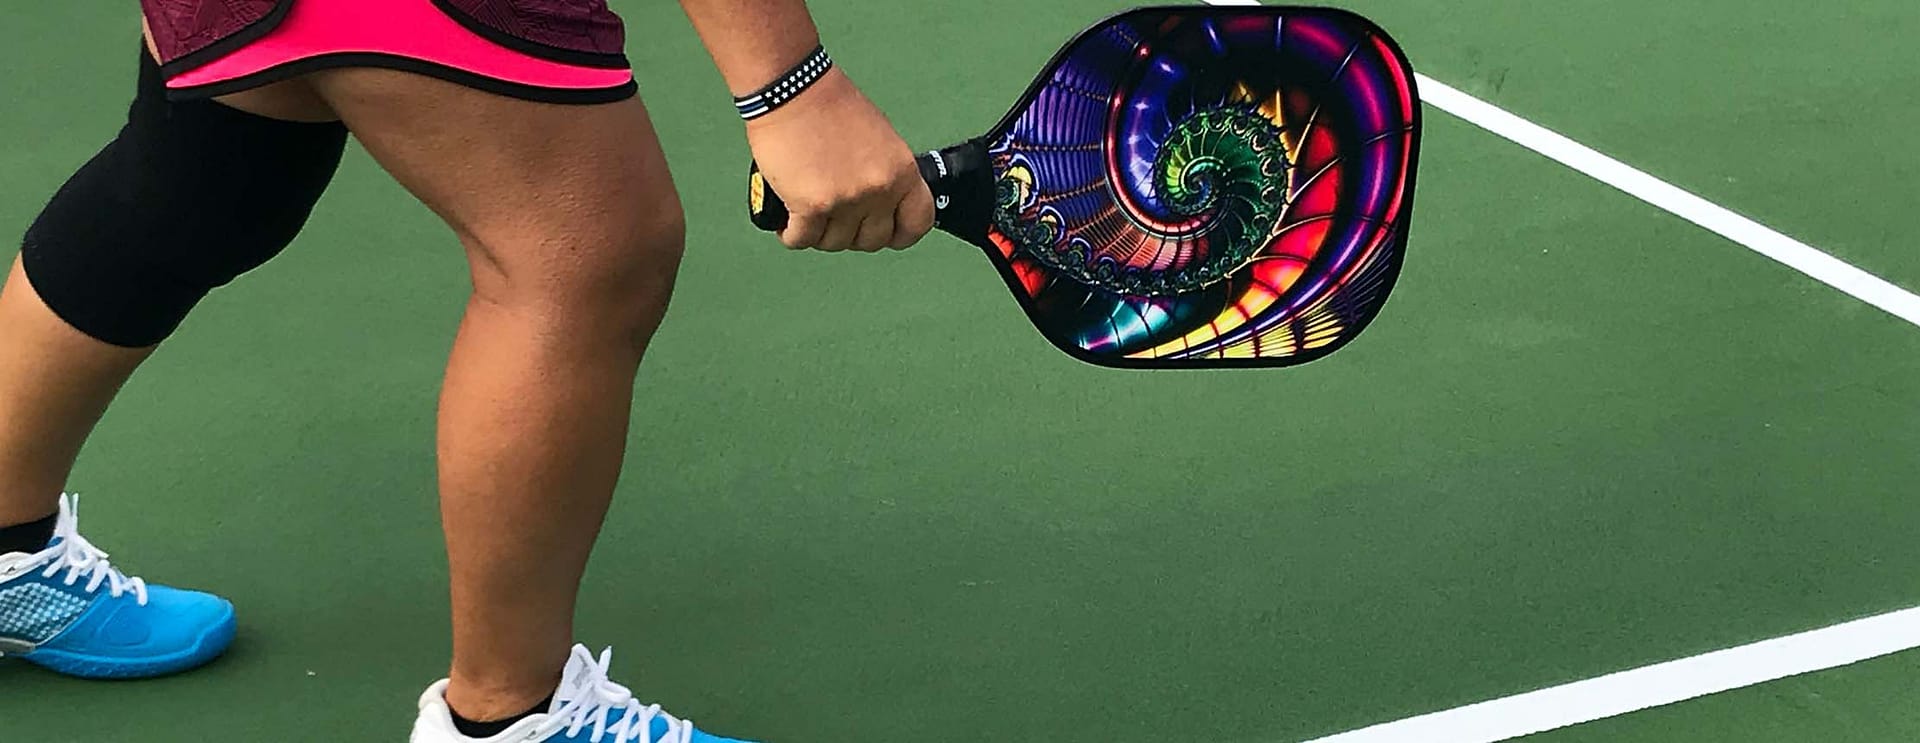 How Pickleball Can Benefit Your Mental Health: The Mind-Body Connection -  Sustain Health Magazine